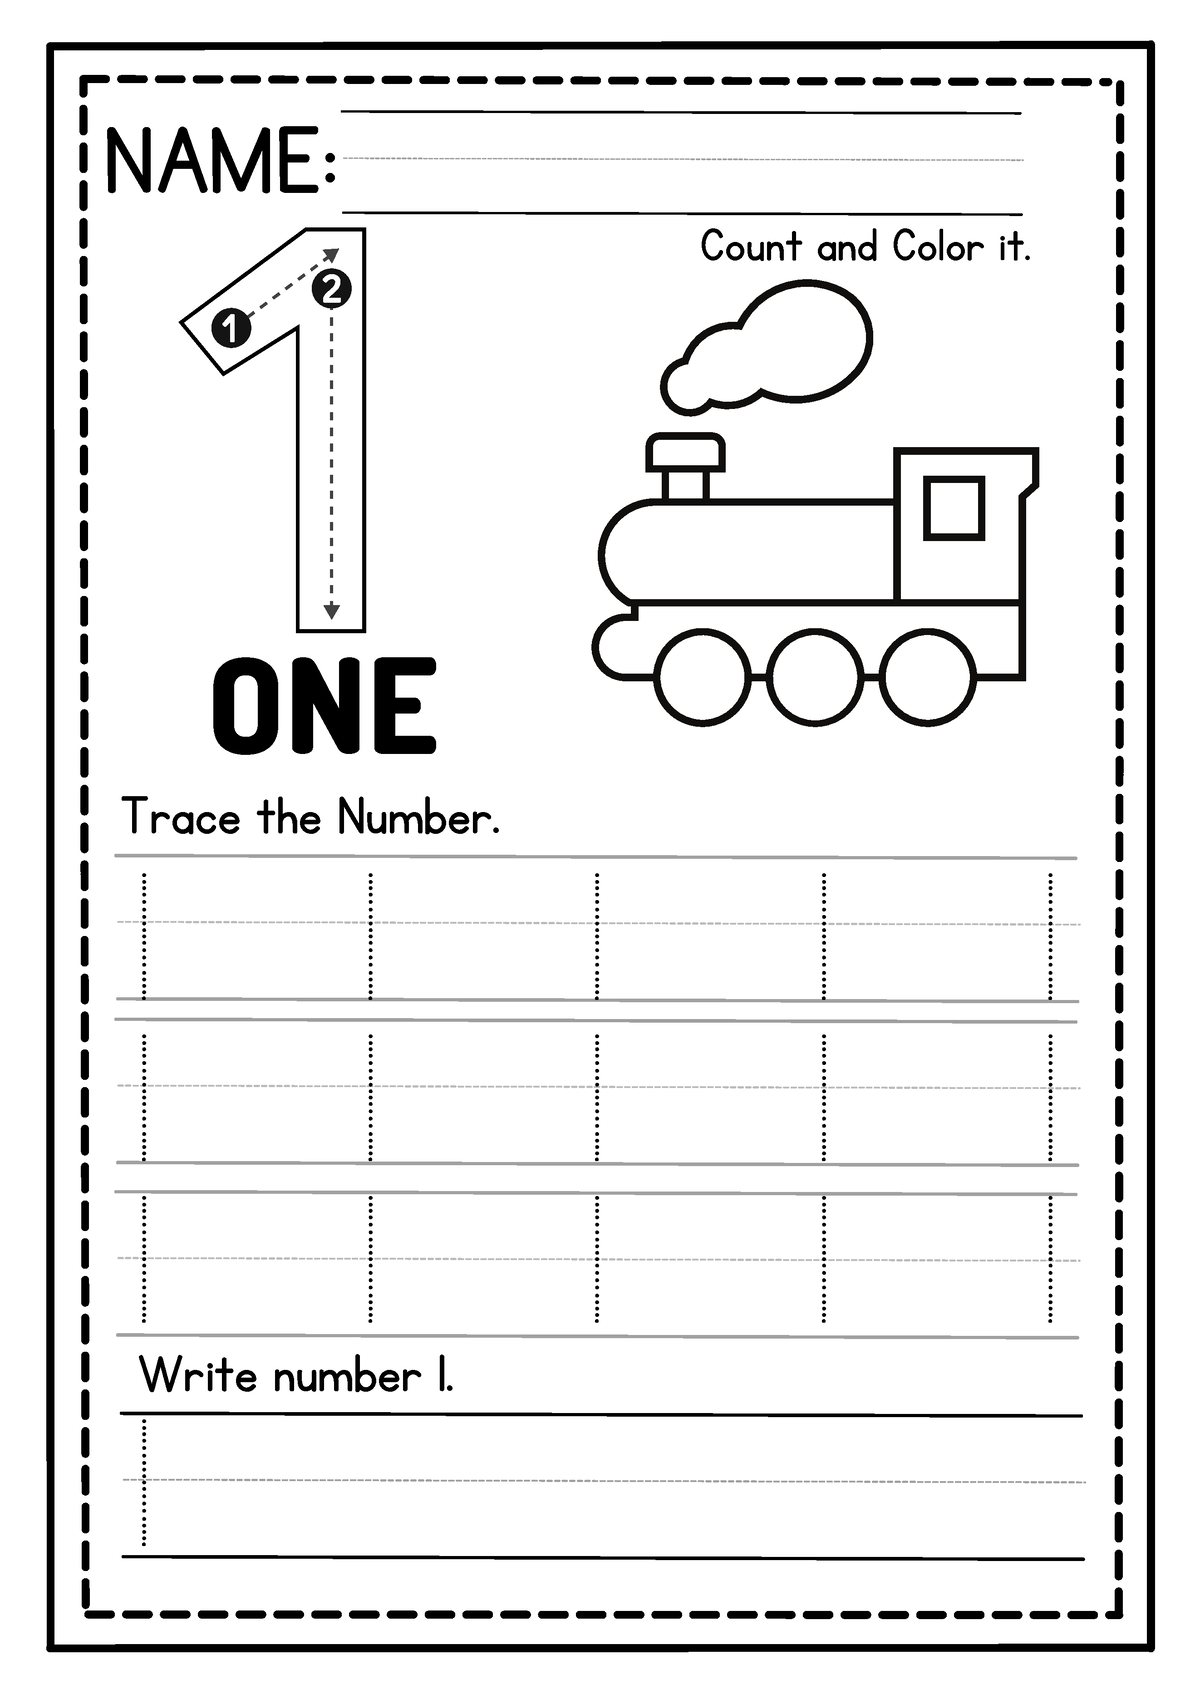 free-number-worksheet-1-10-one-count-and-color-it-trace-the-number